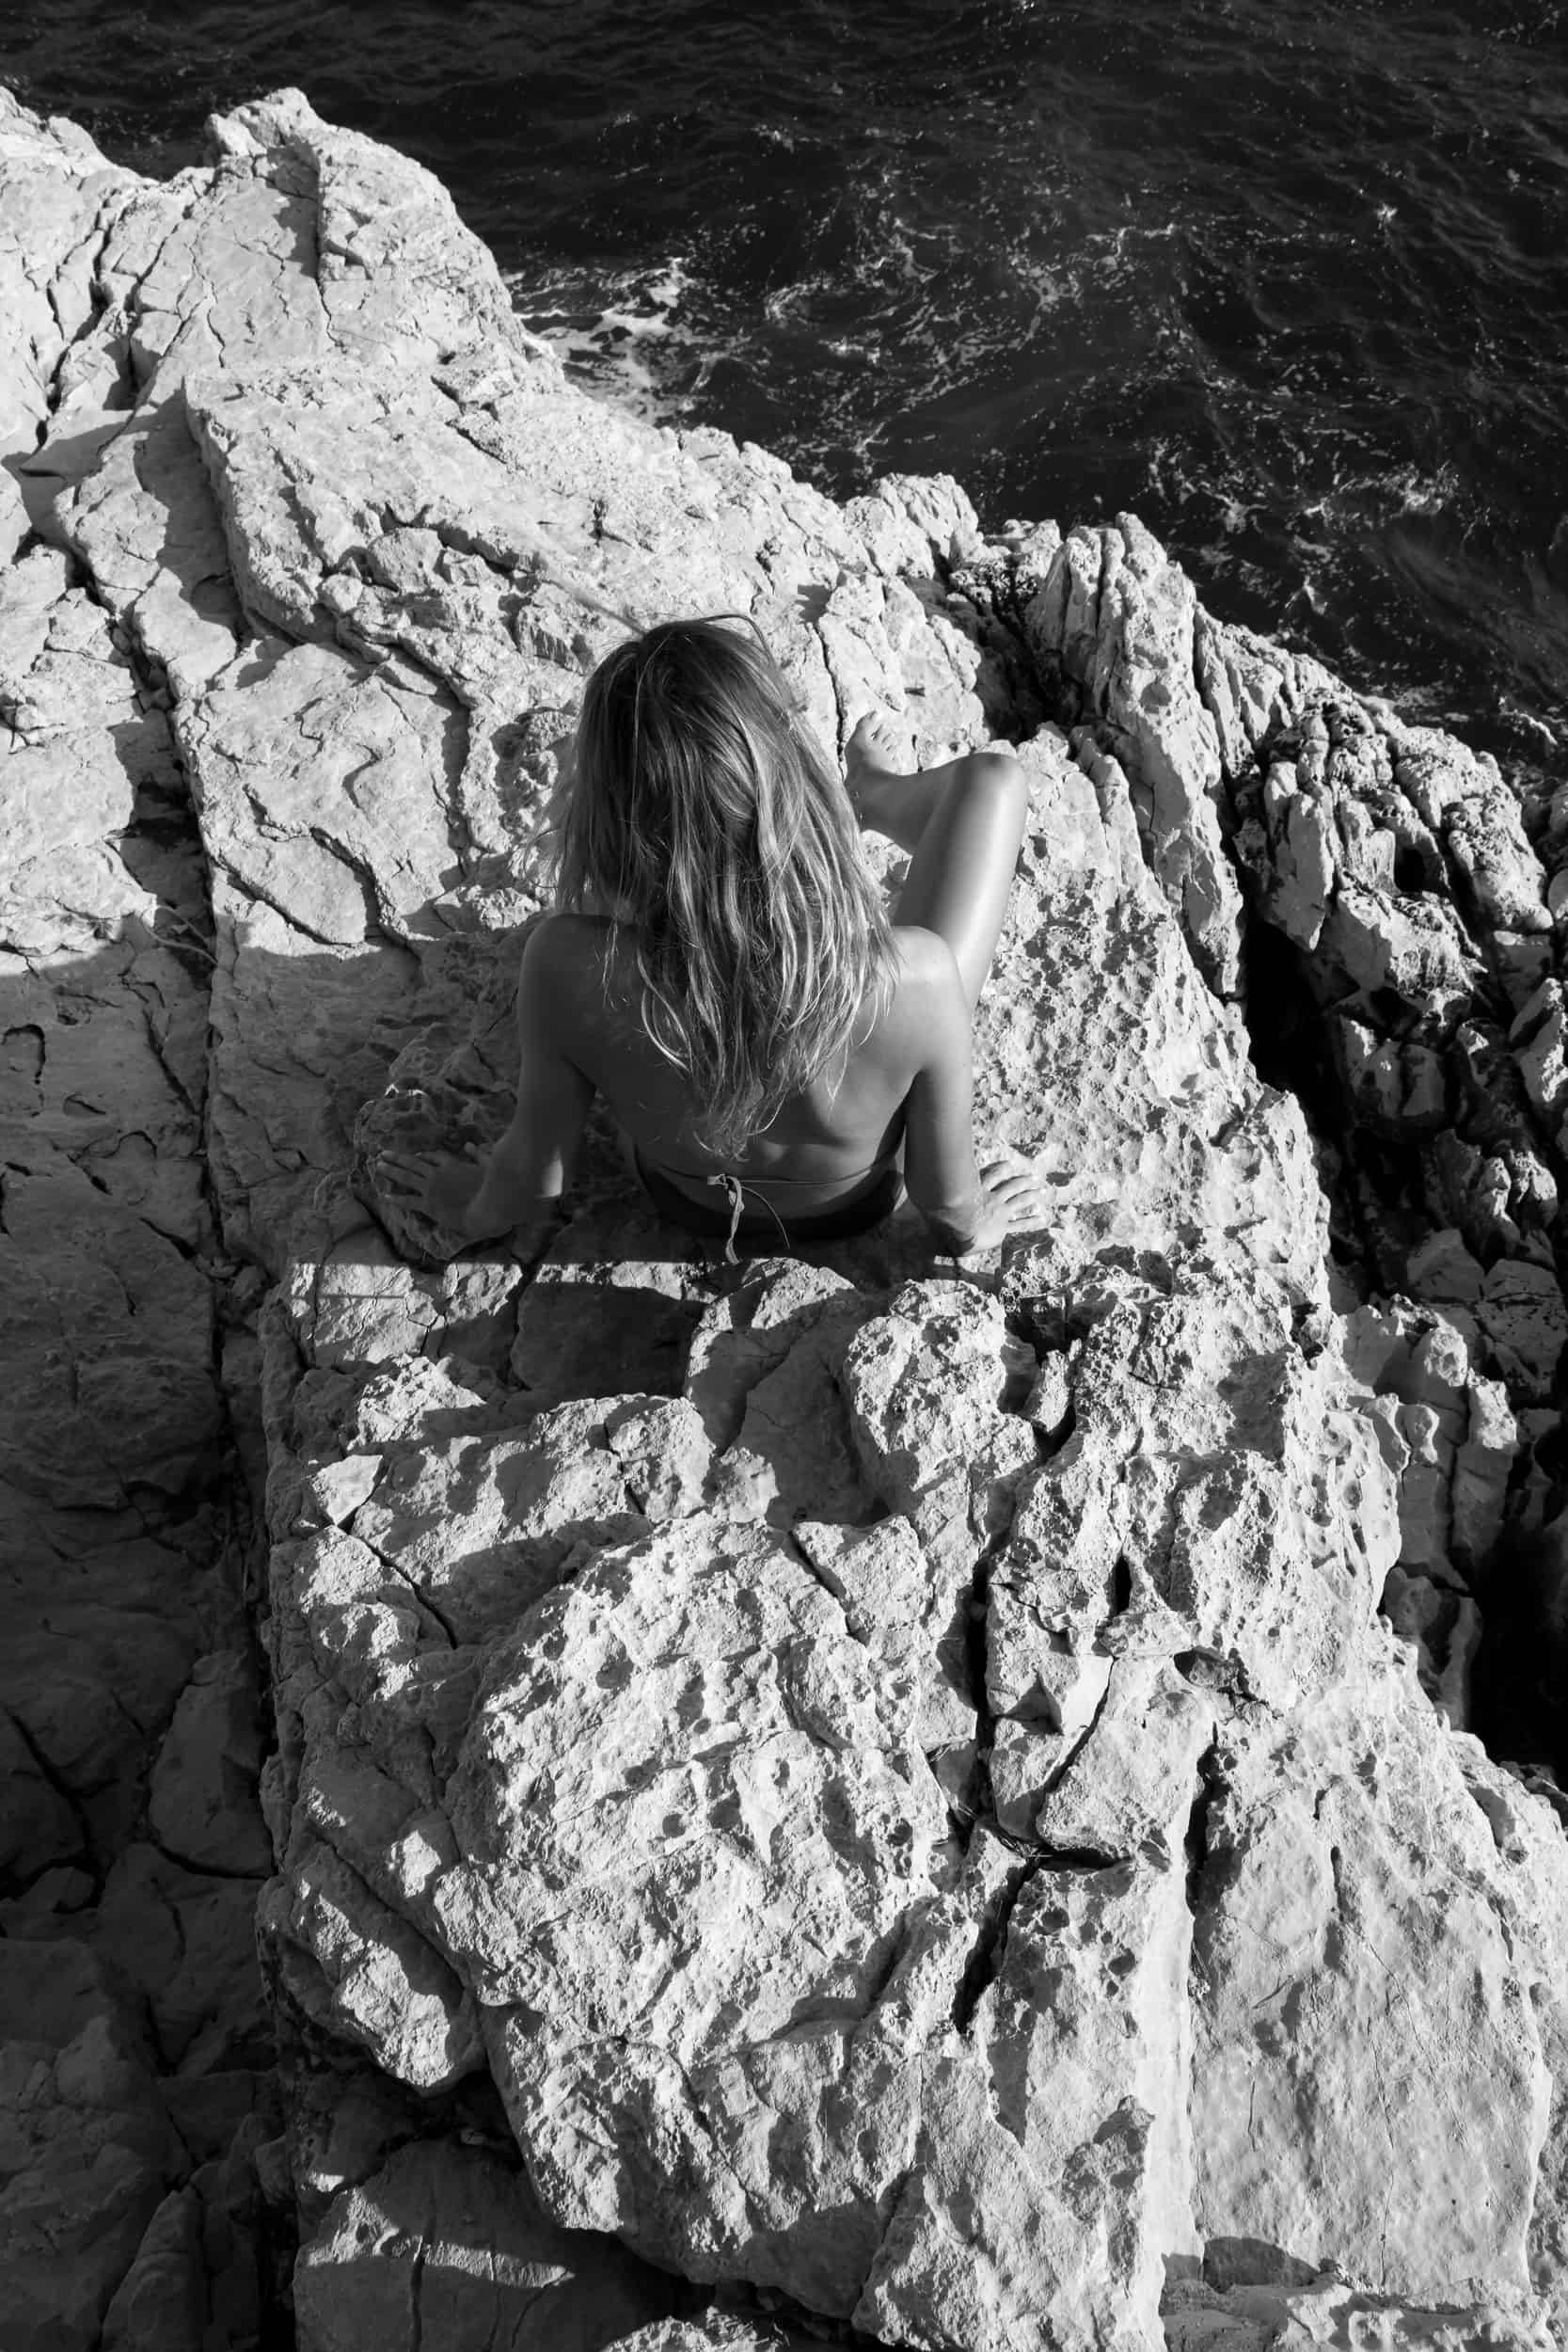 The artpiece 'Plongée' by Mathieu Puga is a black and white fine art piece, an oceanfront image, with a woman, imaged from above sitting on the rocks at the waters edge.